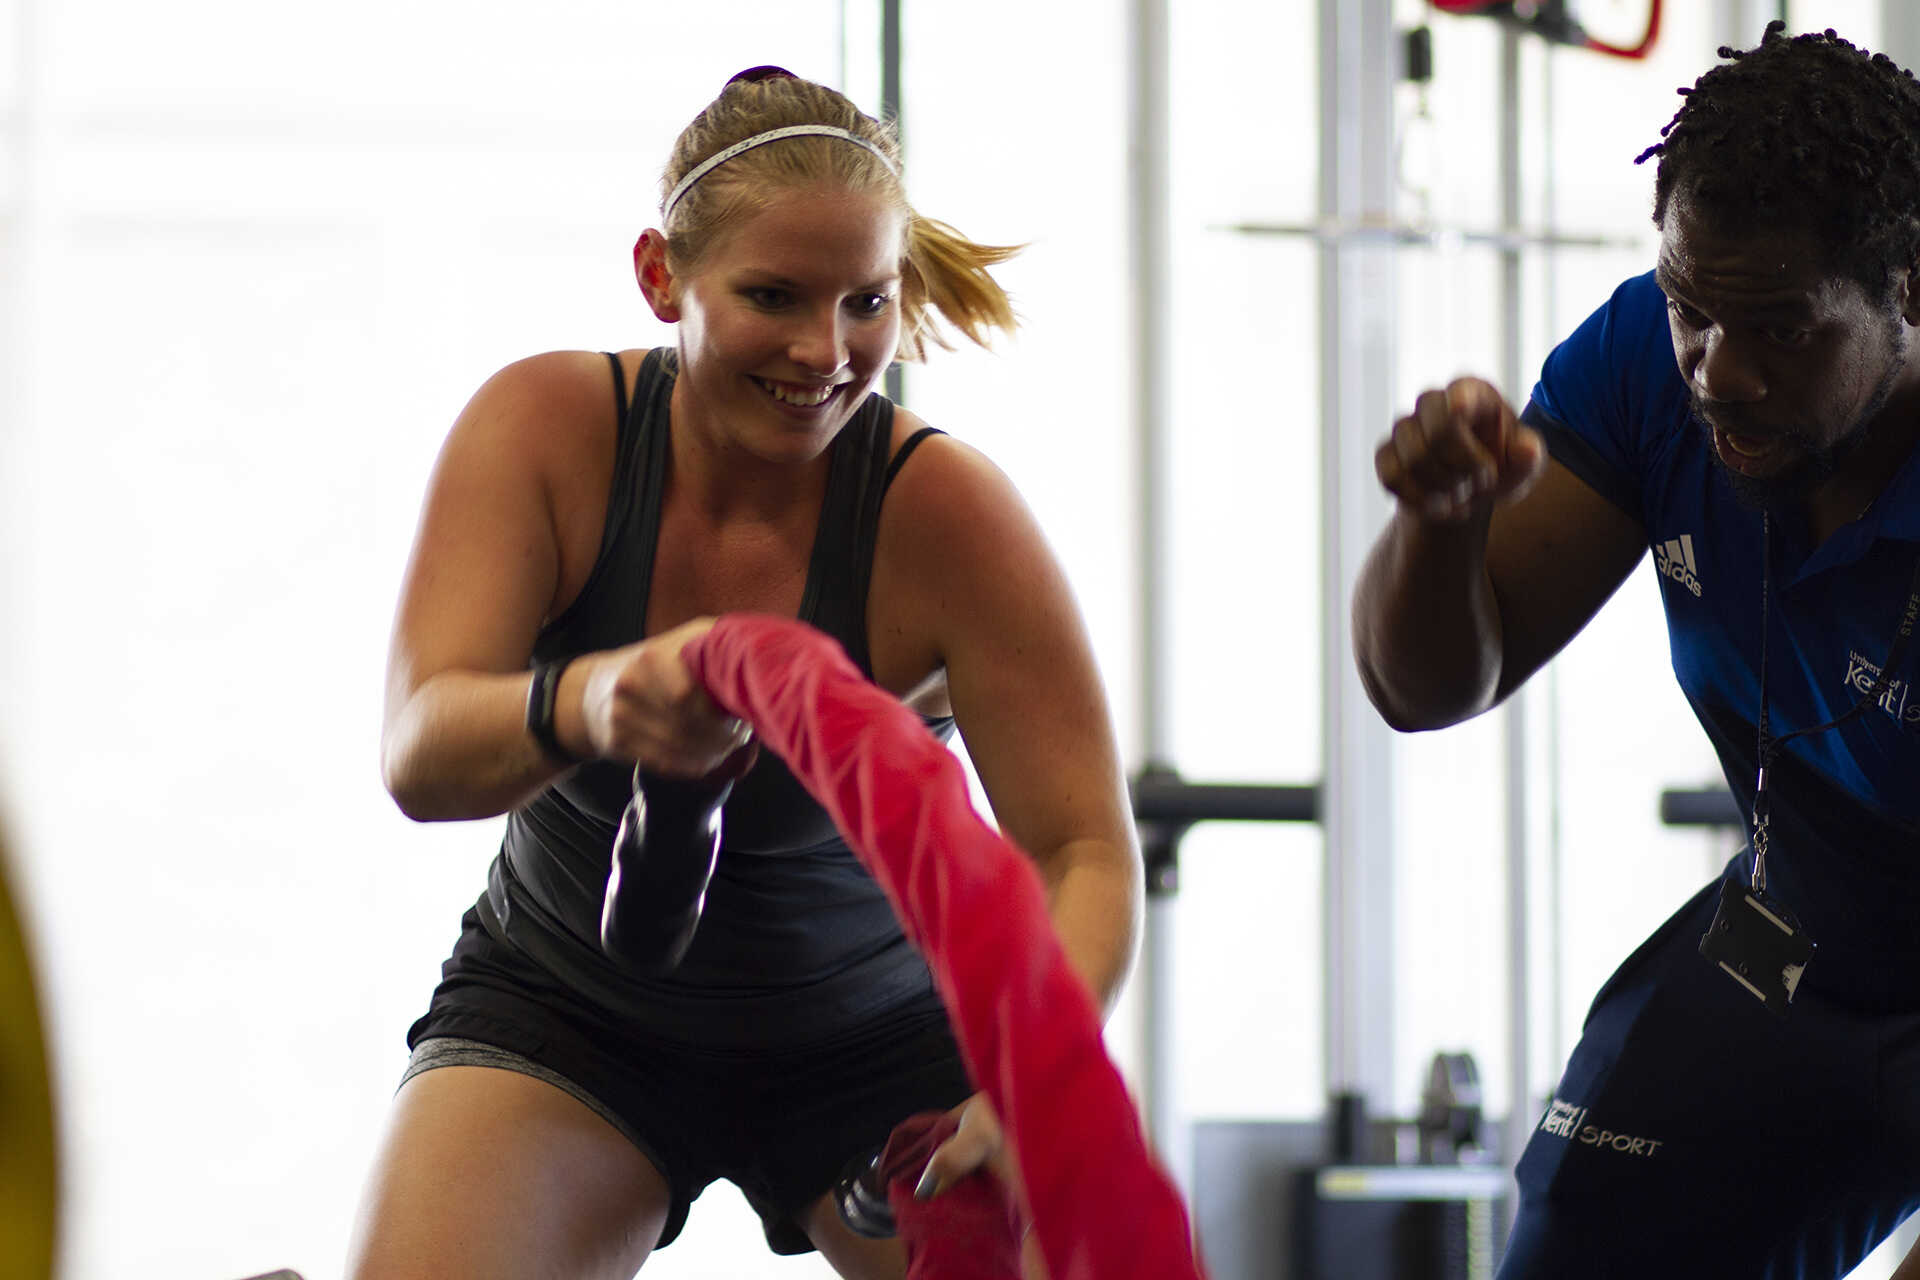 Woman smiling and swinging battle ropes during a personal training session